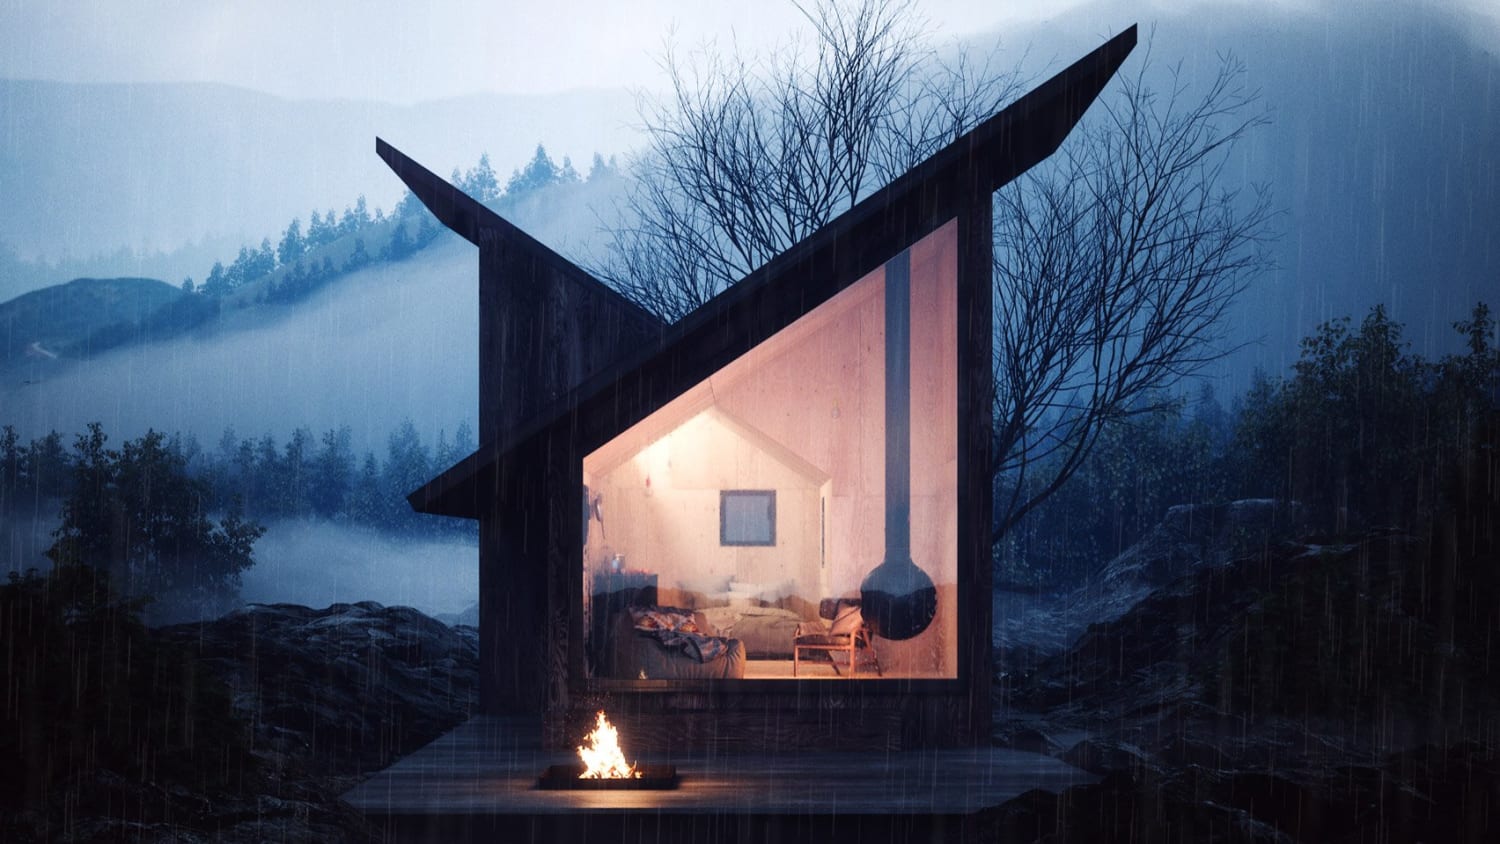 Mountain Refuge is a concept for a tiny cabin that could be built anywhere